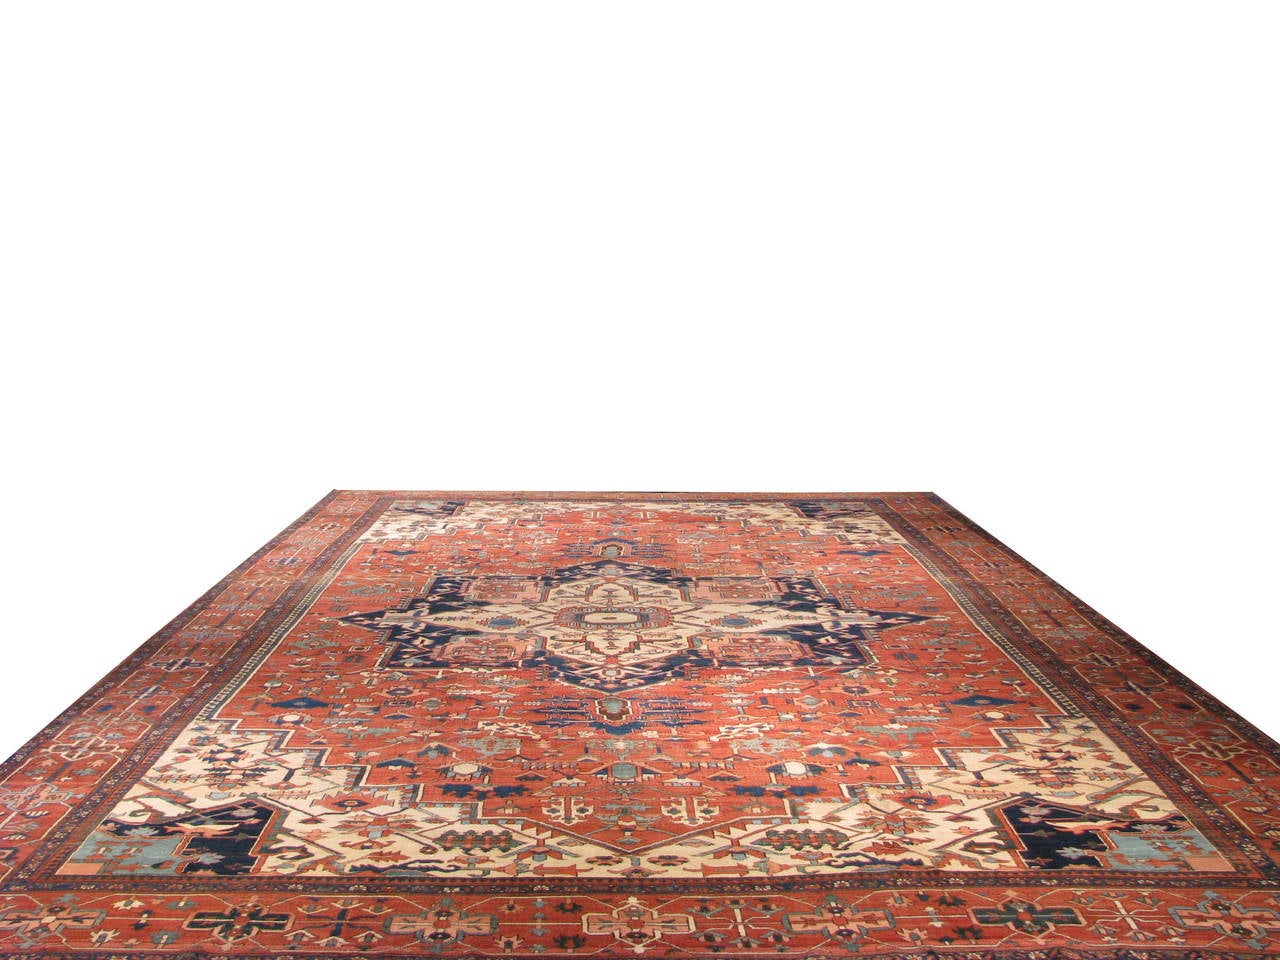 The Serapi rug is manufactured in what was known as the Sarab region of Persia, now located in Azerbaijan and North West of Iran. Original Serapi rugs were created in the villages of Serapi, Sarab, Ahar, Heriz and Ghorevan. The Serapi rug can be